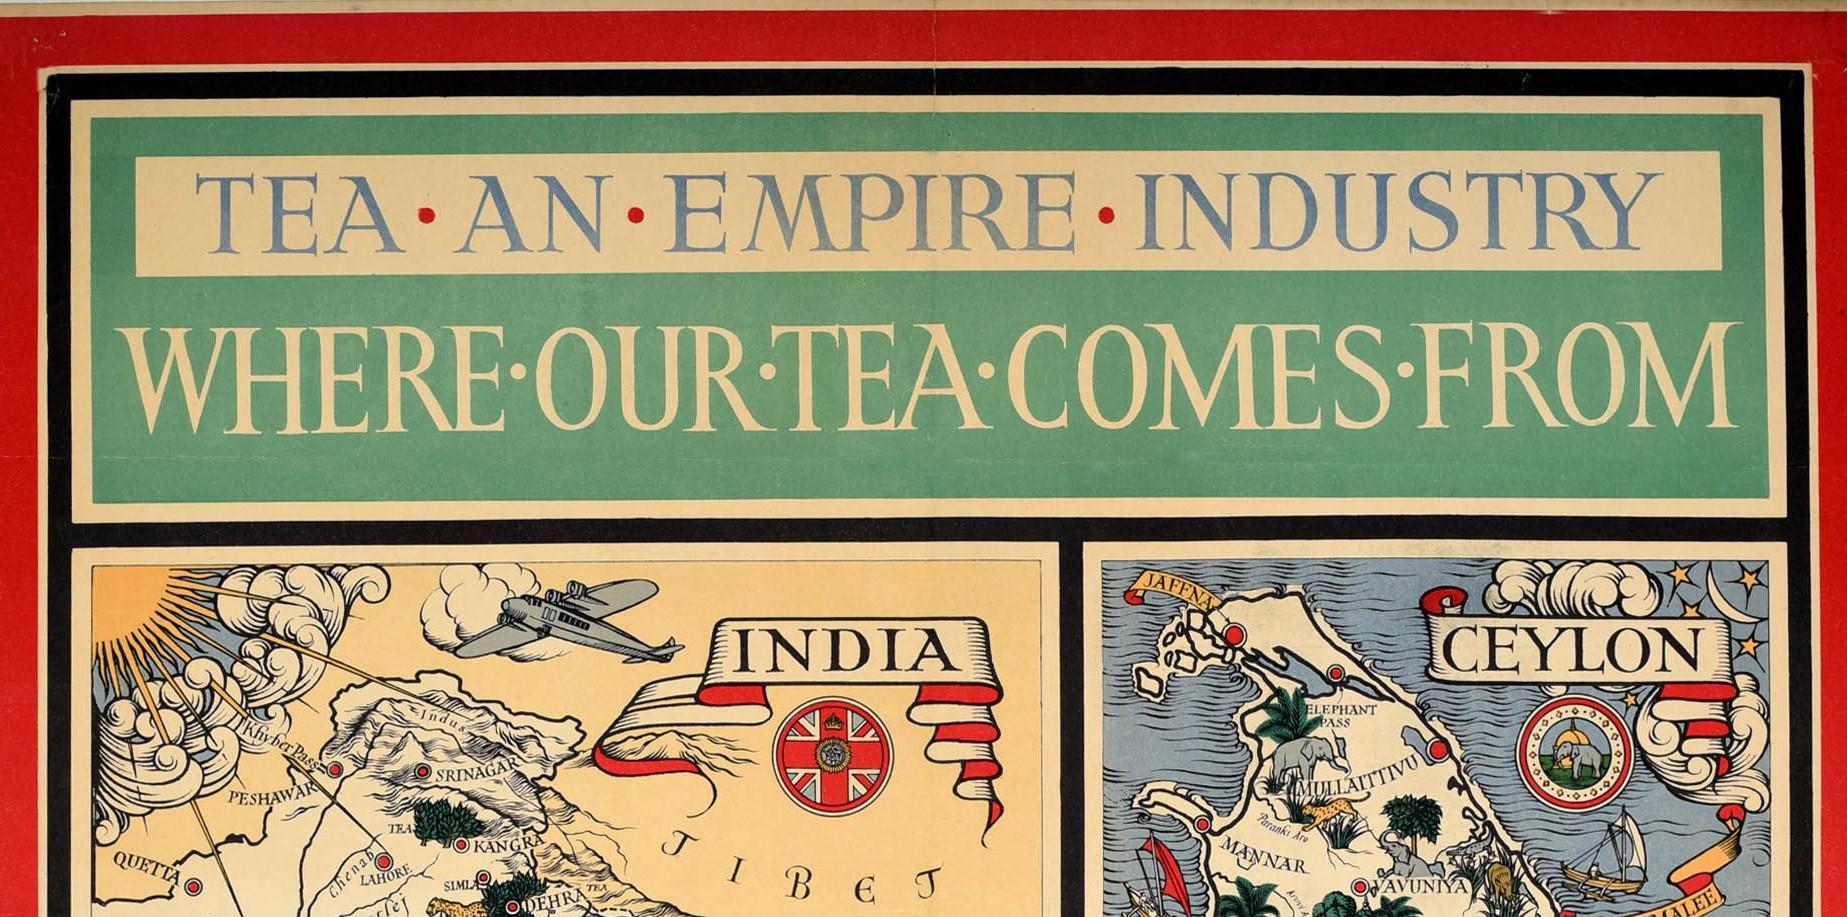 Original Vintage Illustrated Map Poster Empire Industry Where Our Tea Comes From - Print by Macdonald Gill